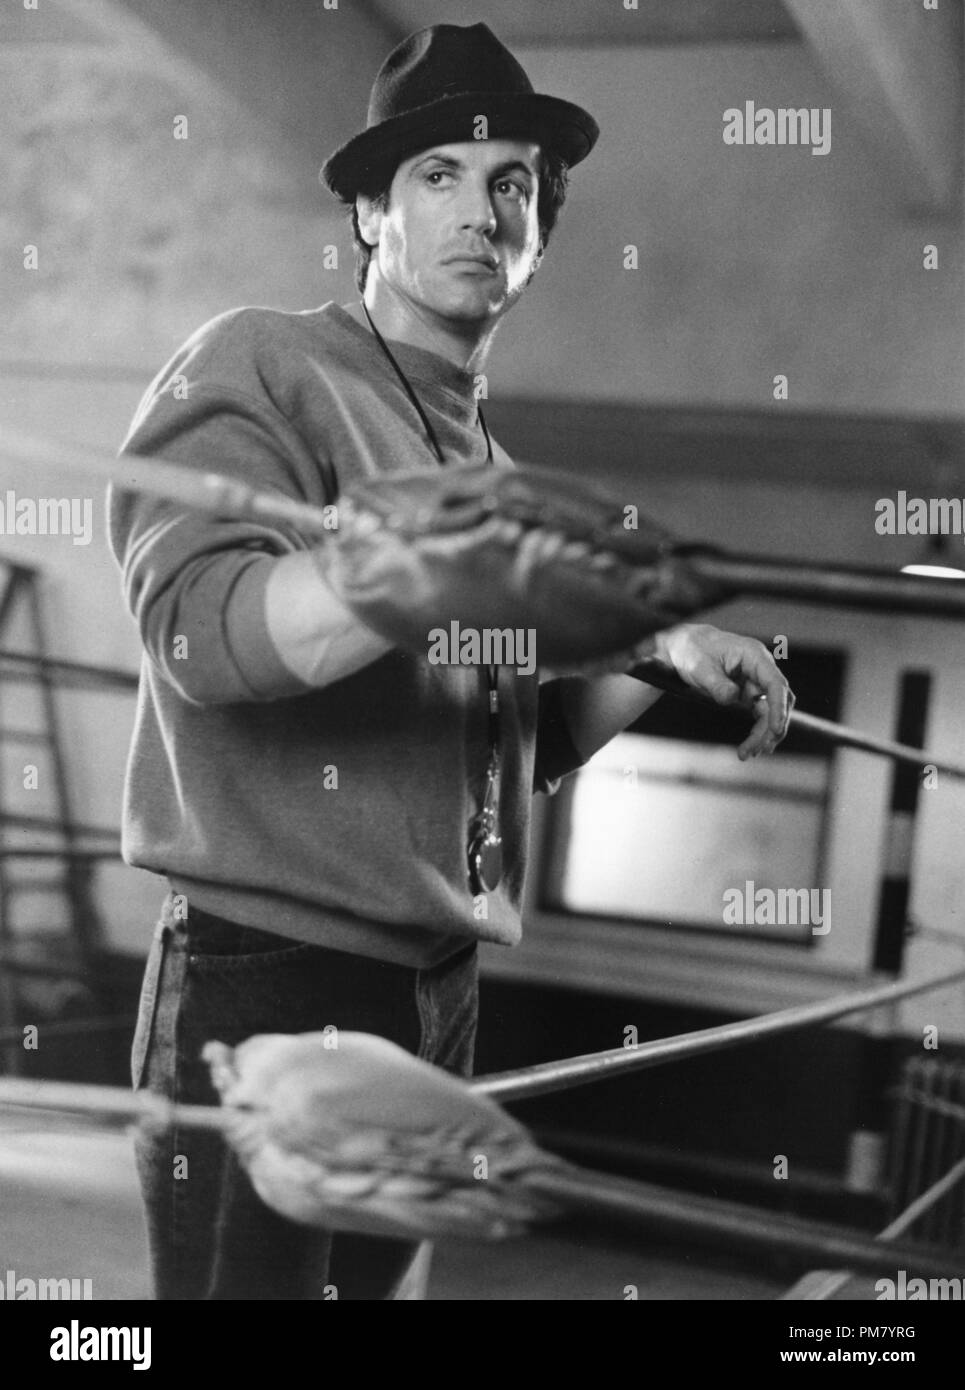 Film still or Publicity still from "Rocky V" Sylvester Stallone © 1990 MGM  All Rights Reserved   File Reference # 31571094THA  For Editorial Use Only Stock Photo